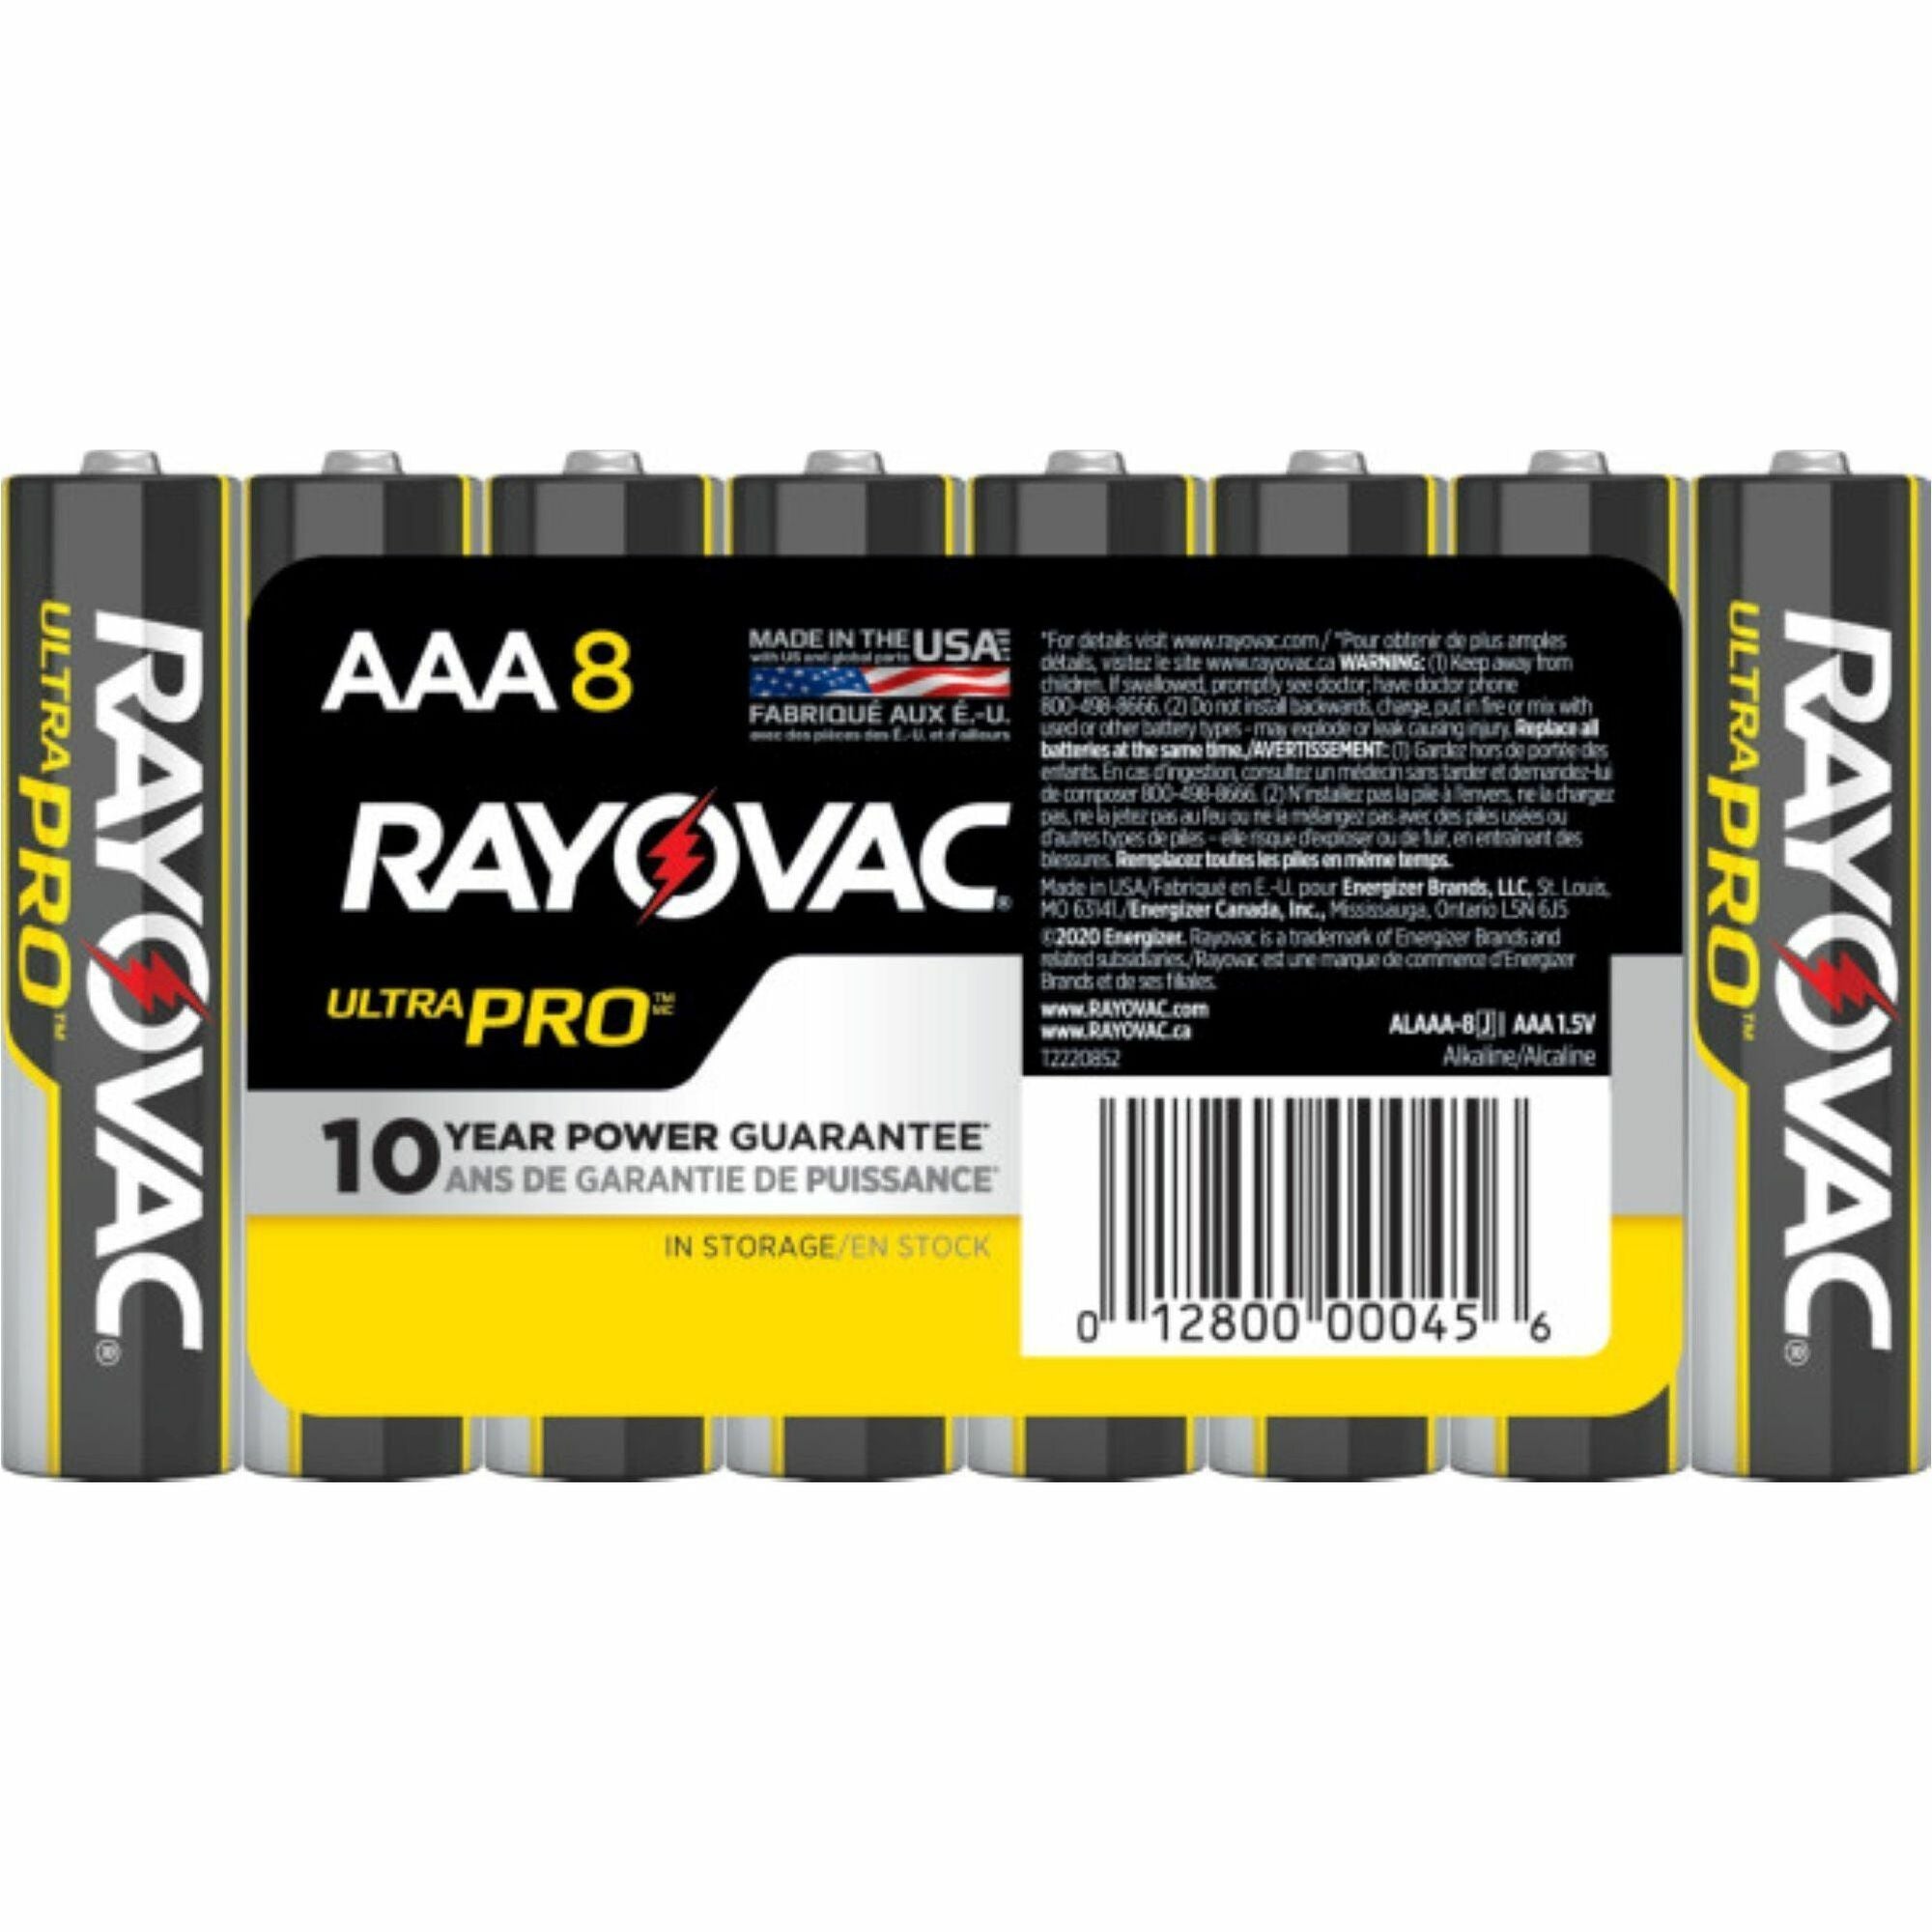 Rayovac Ultra Pro Alkaline AAA Batteries - For Multipurpose - AAA - 1.5 V DC - 8 / Pack - 1